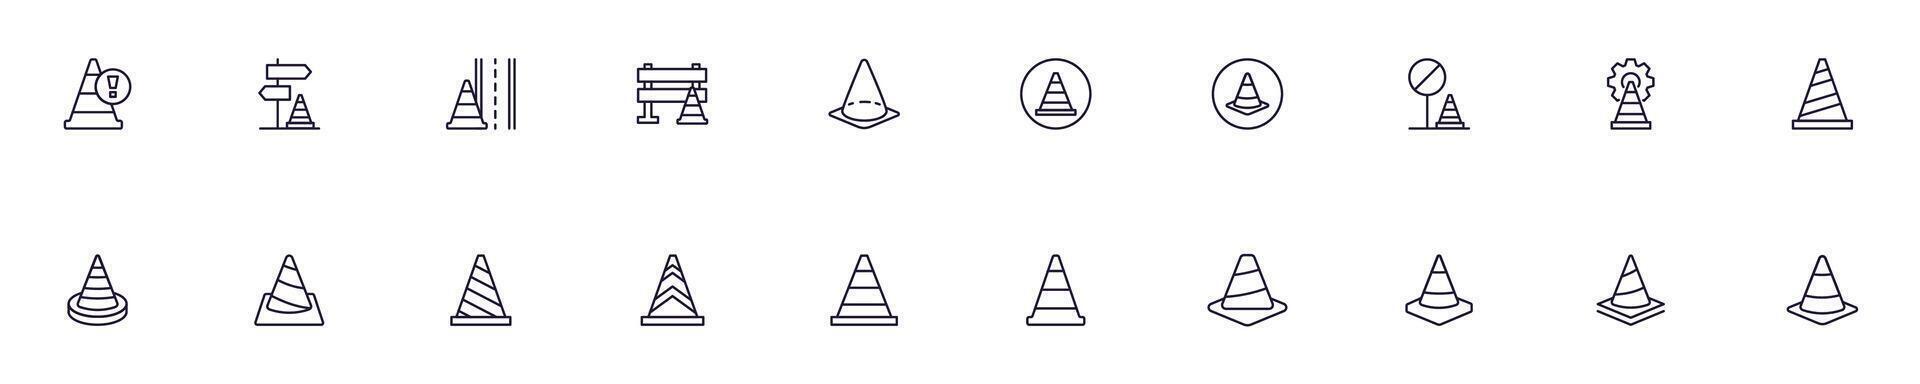 Traffic cone linear symbols bundle. Vector collection for web sites, newspapers, apps, infographics